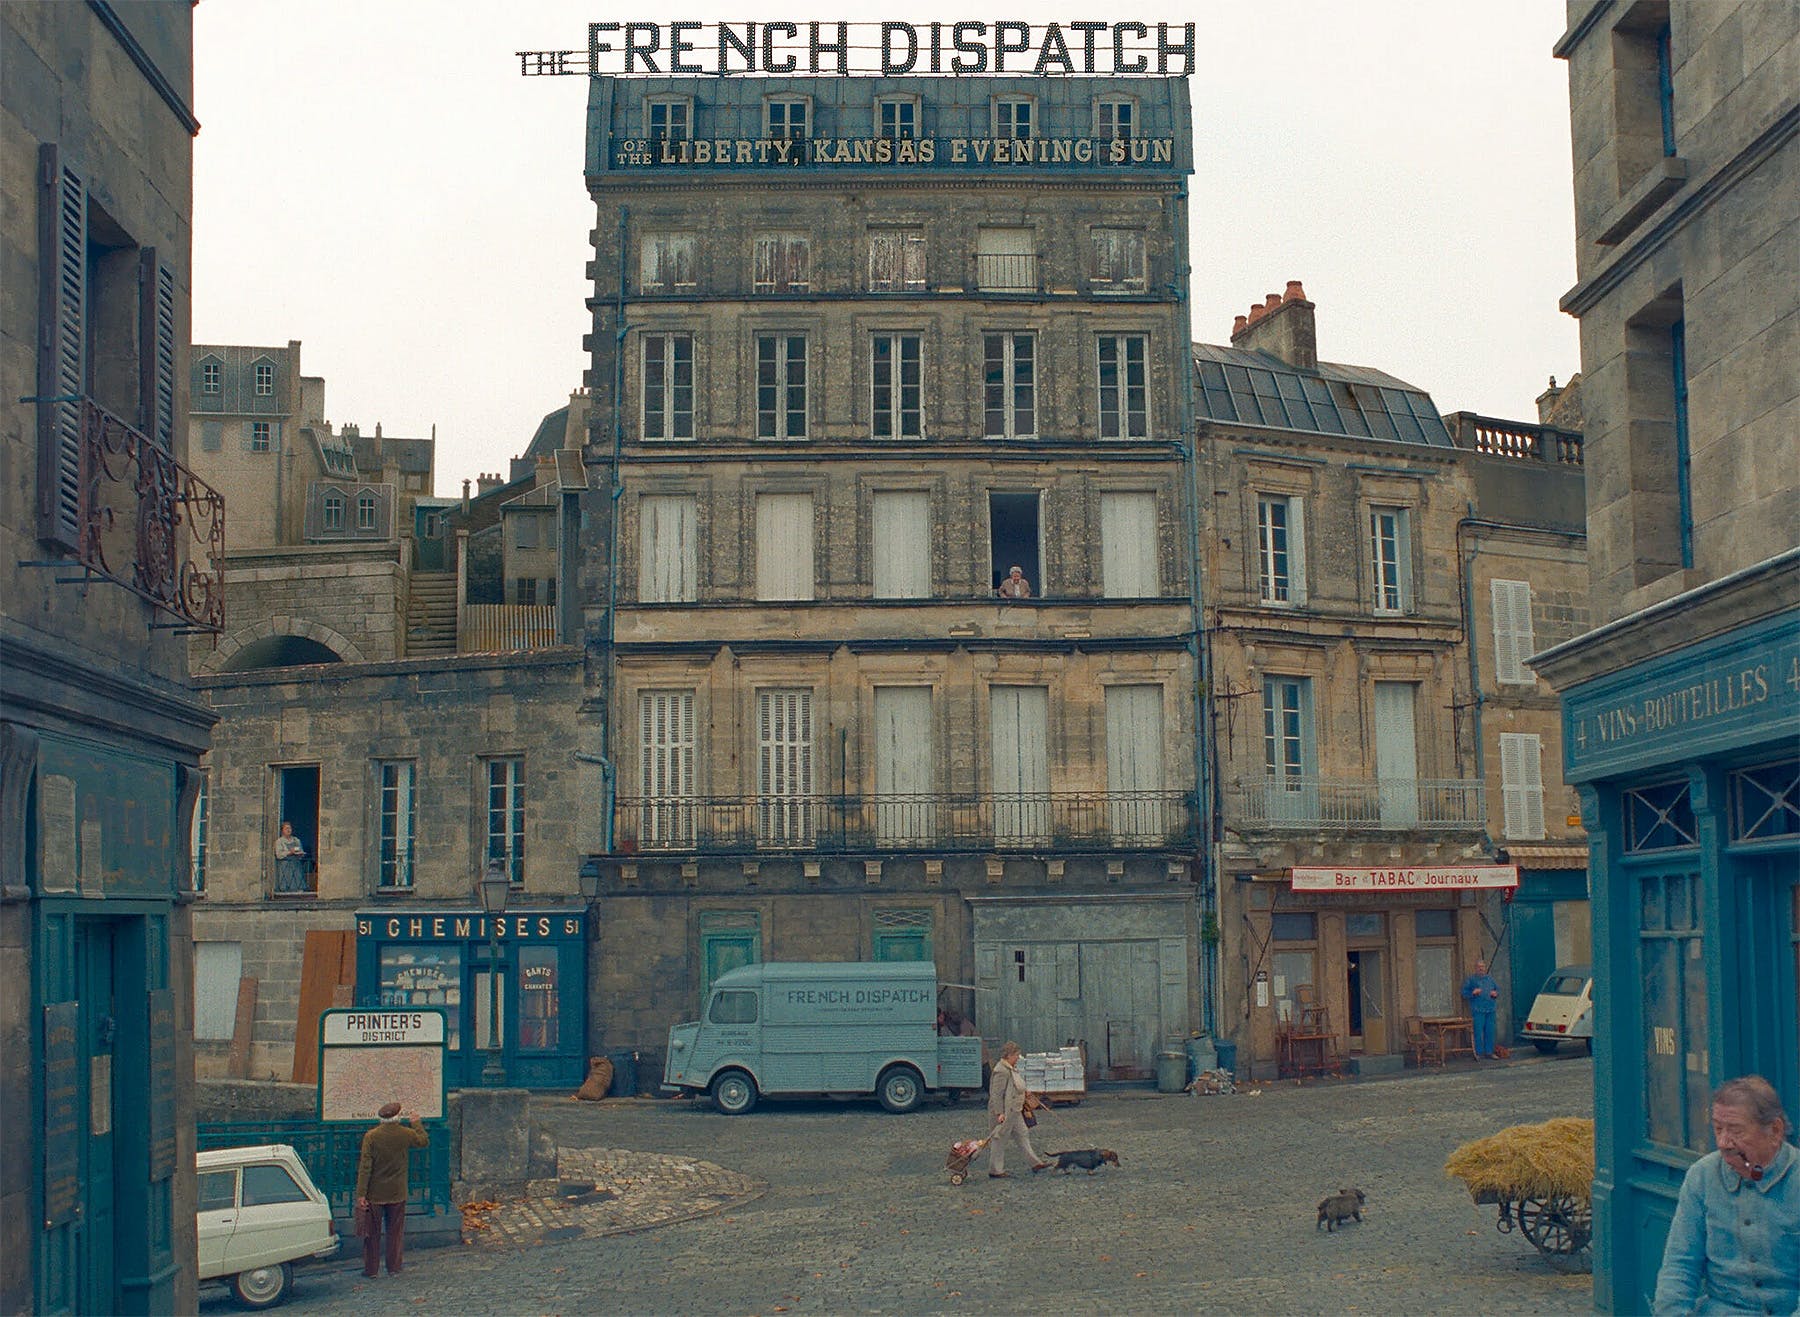 Wes Anderson has transformed an entire French city for his latest film